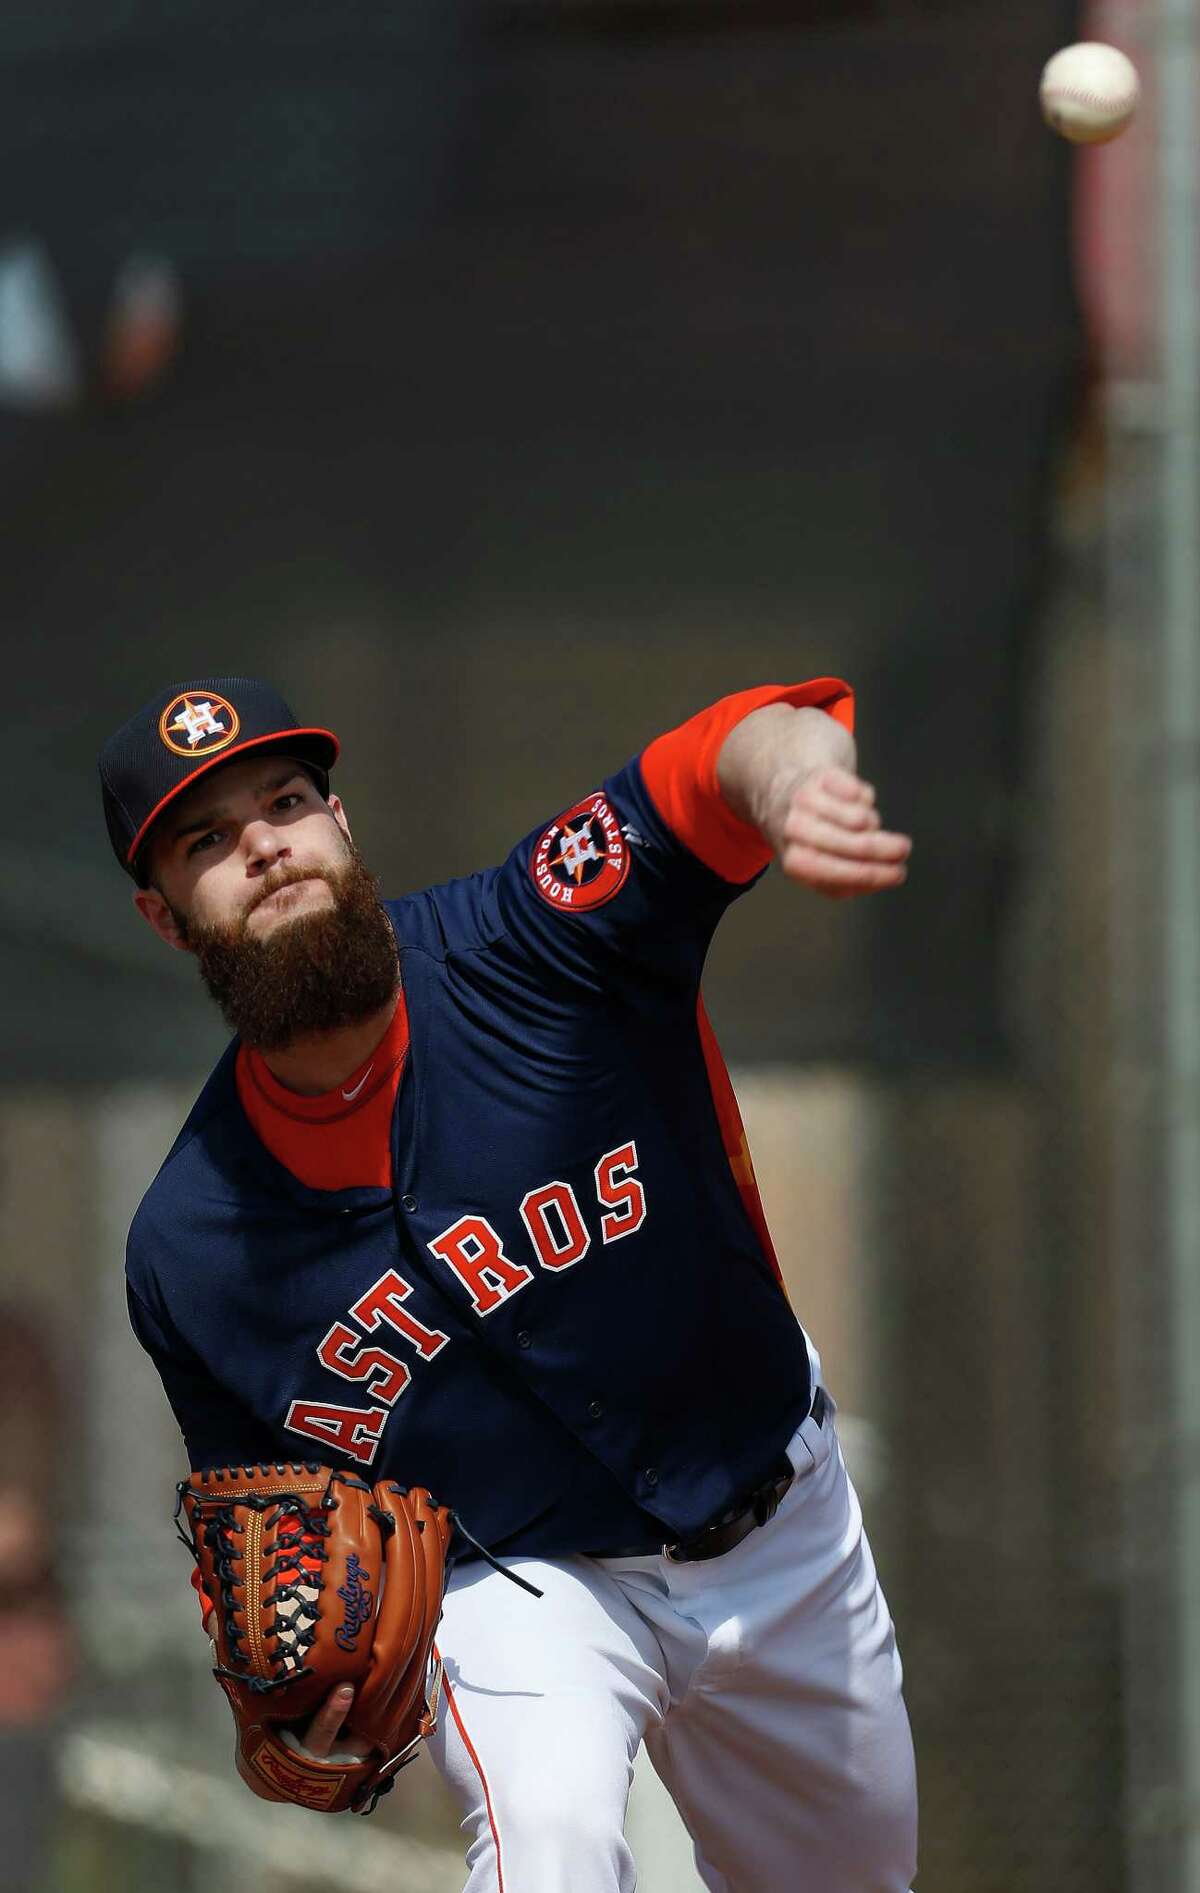 Astros pitcher Dallas Keuchel won't be shaving his trademark beard during the season, but he says he has thought about shaving it as a way to raise money for charity in the future. "When the right opportunity comes, it'll come off," he said.